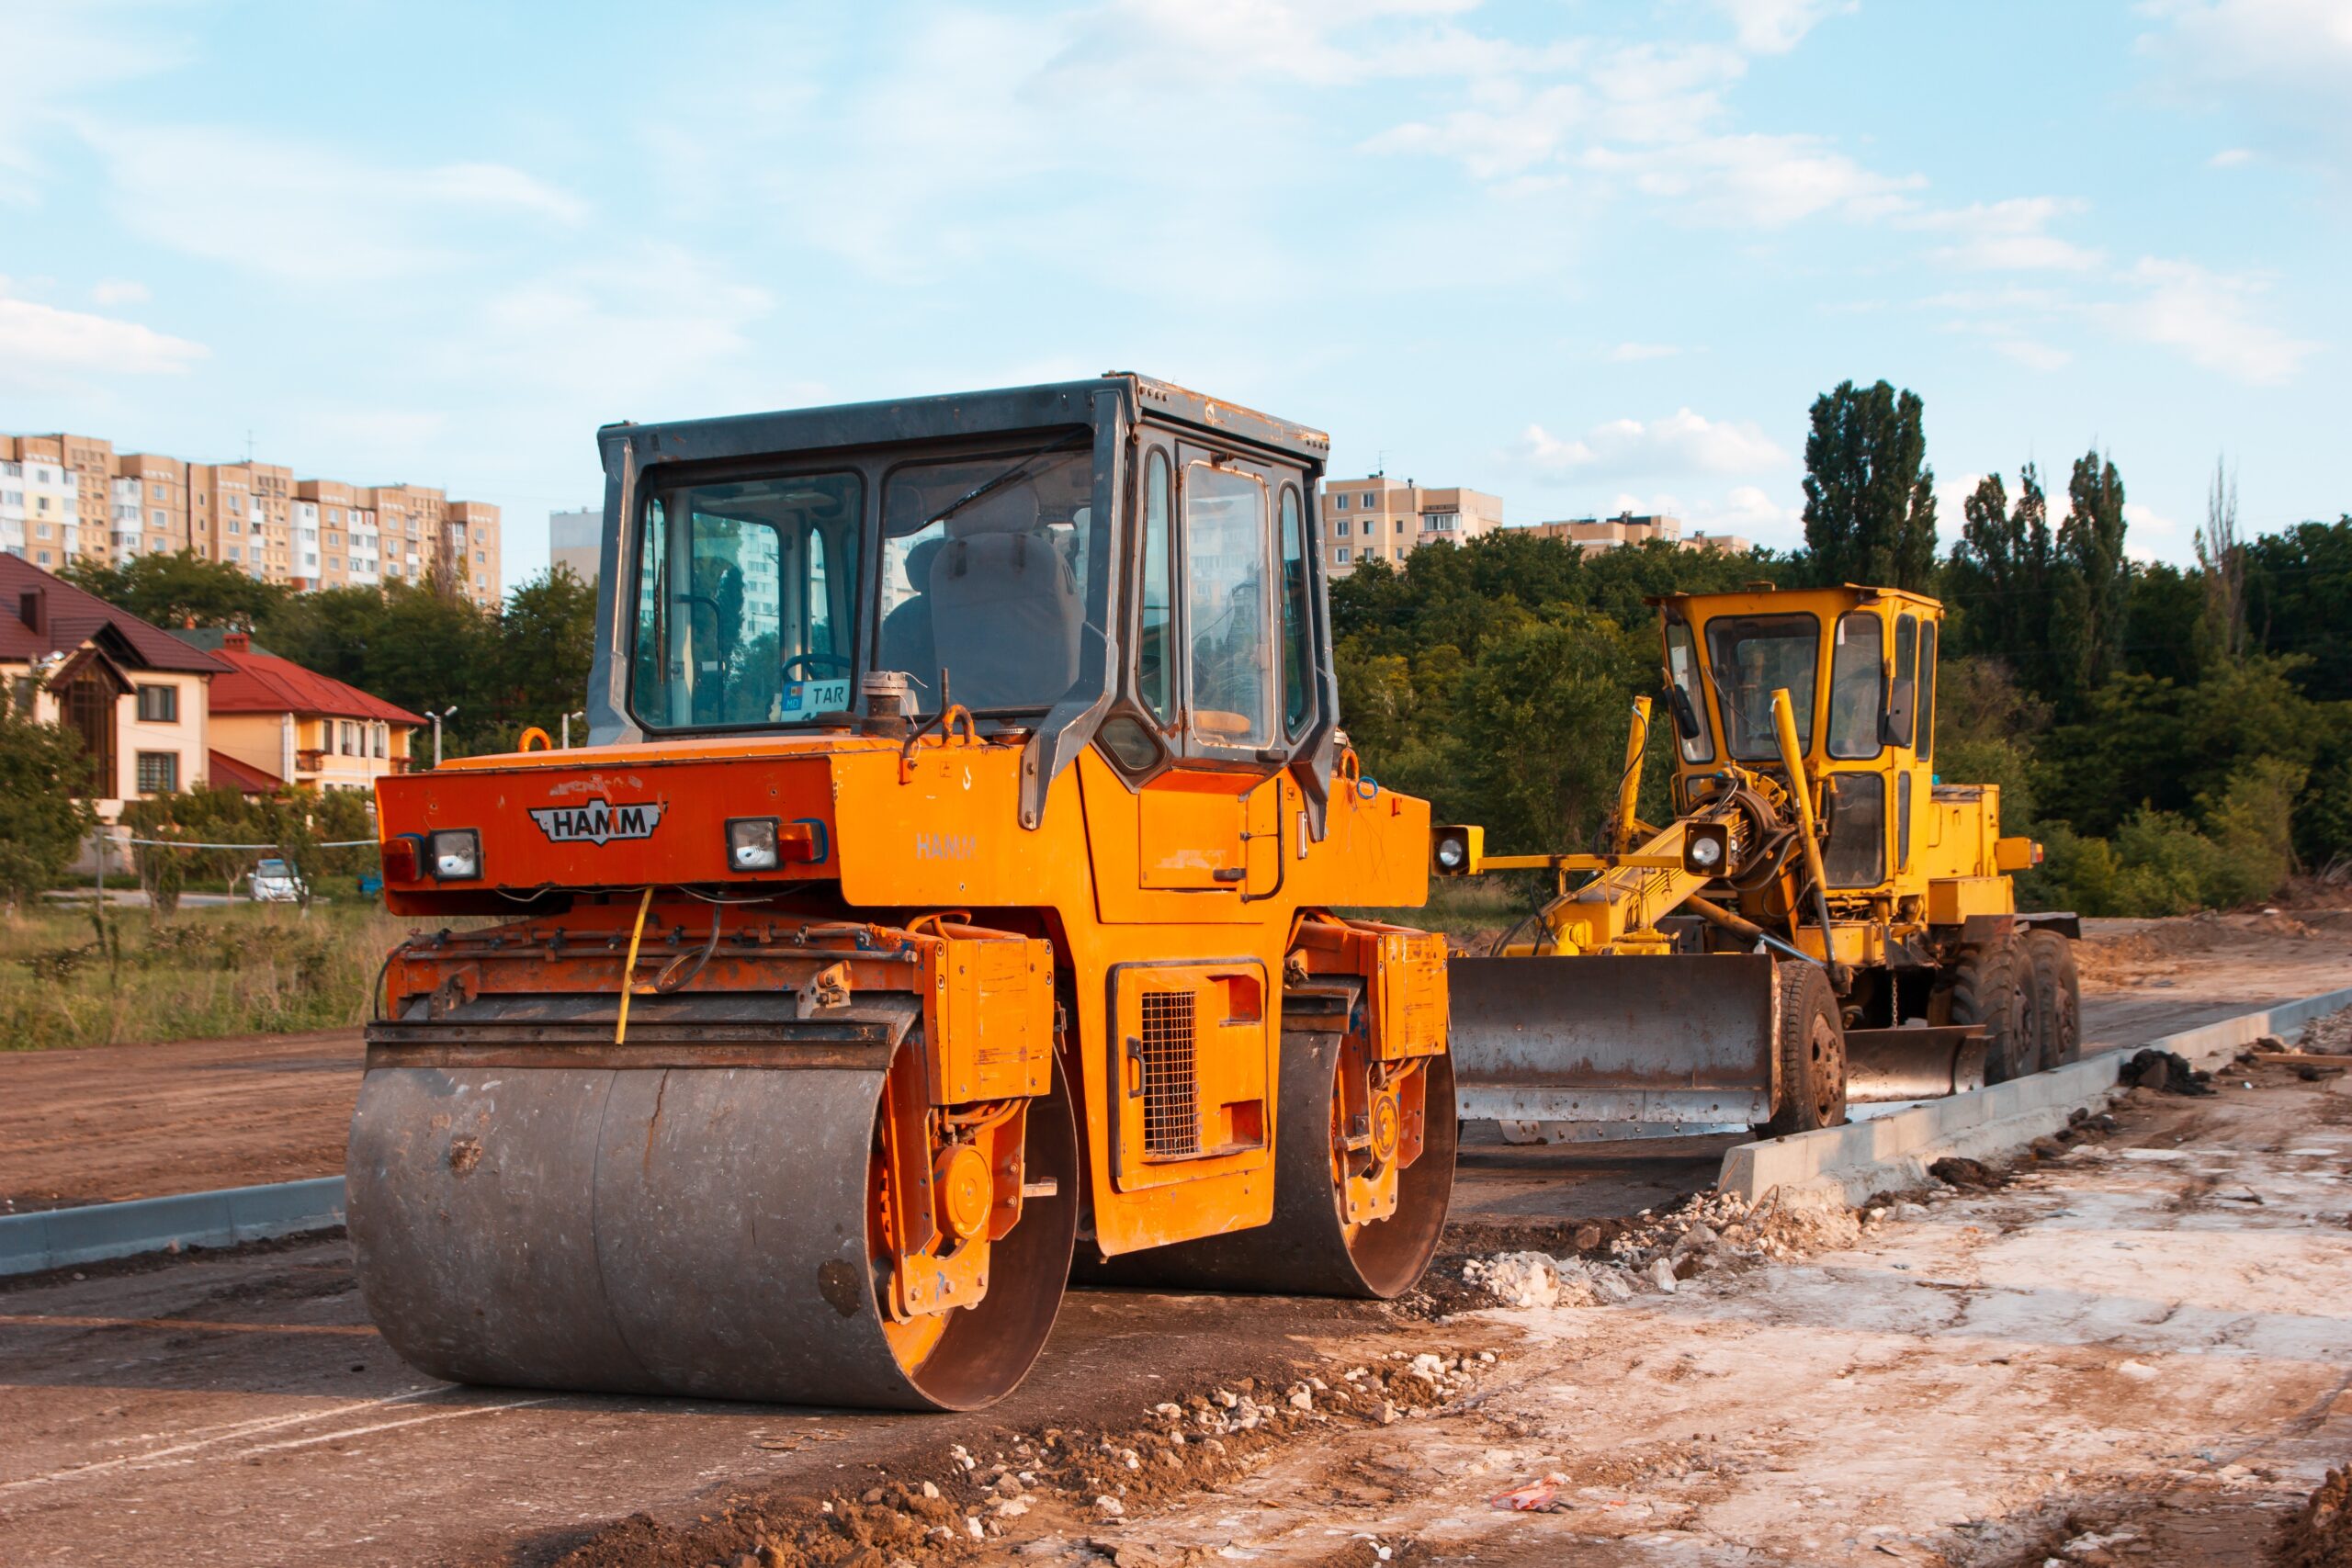 Equipment Financing solutions are made easy for you at Natadore Fund.